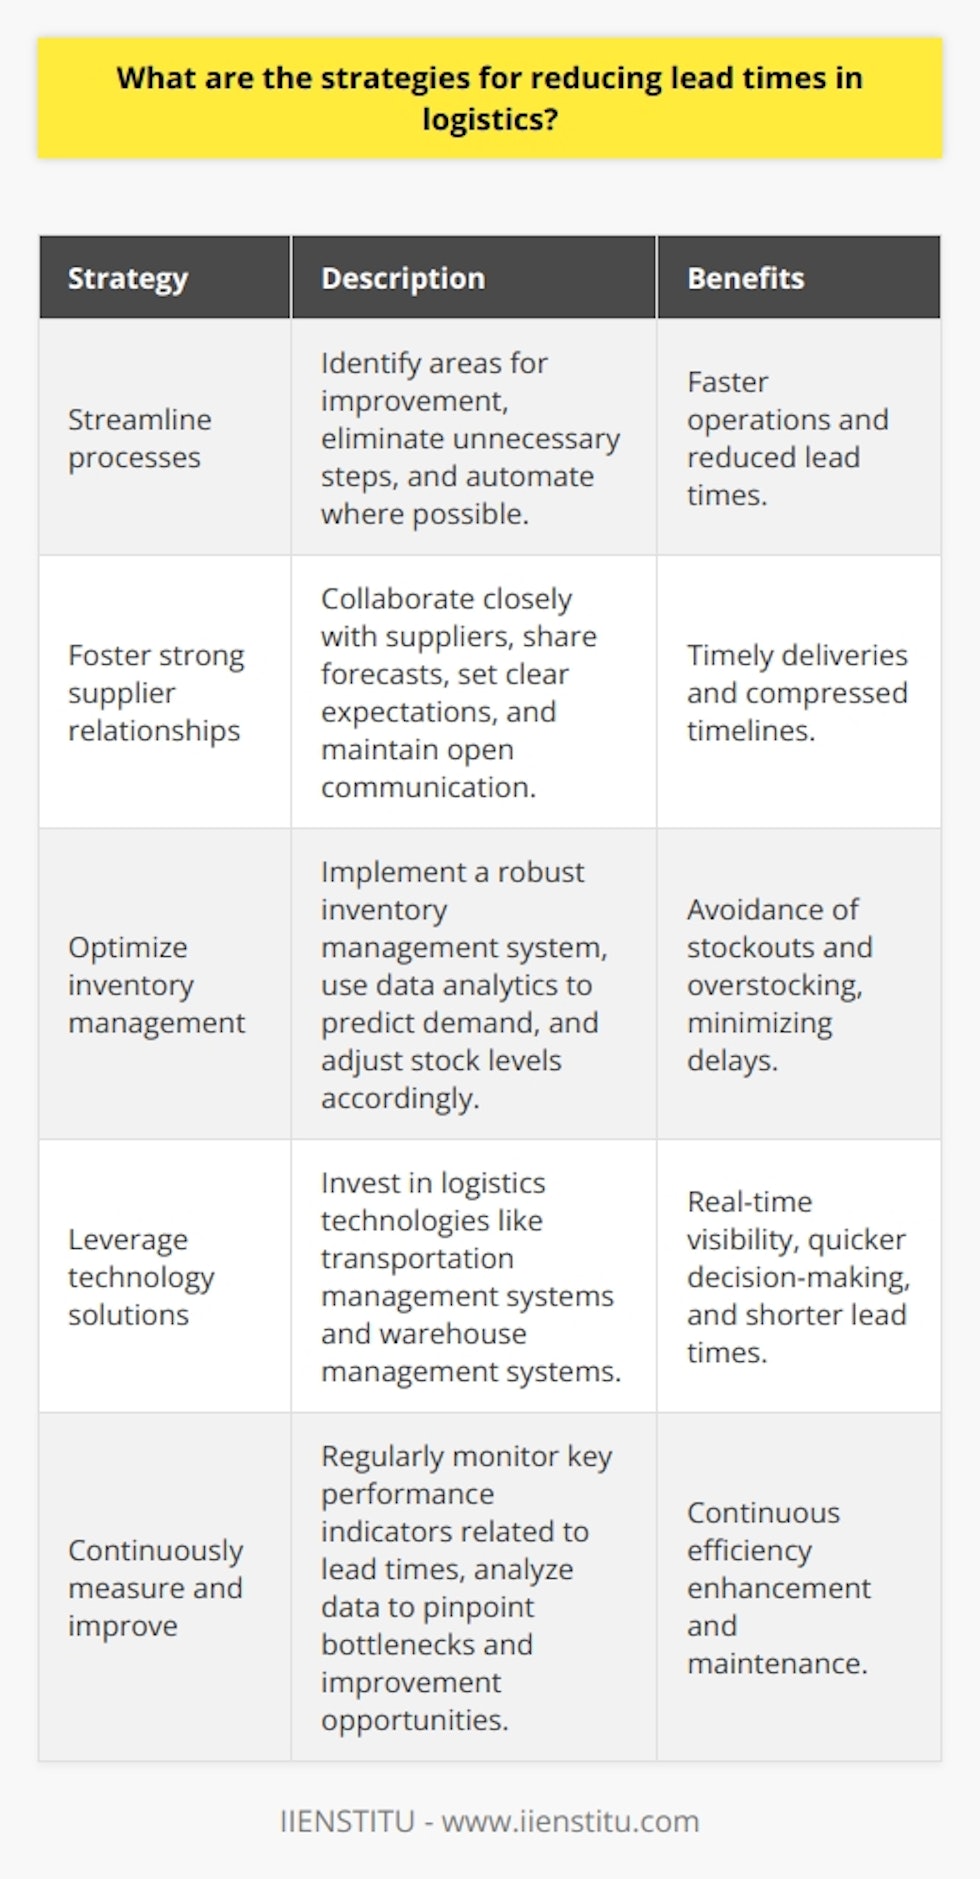 As a logistics professional with over a decade of experience, Ive found several effective strategies for reducing lead times: Streamline processes Take a close look at your current processes and identify areas for improvement. Eliminate unnecessary steps and automate where possible. This can significantly speed up operations and reduce lead times. Foster strong supplier relationships Collaborate closely with suppliers to ensure timely deliveries. Share forecasts, set clear expectations, and maintain open lines of communication. Strong partnerships are key to compressing timelines. Optimize inventory management Implement a robust inventory management system to avoid stockouts and overstocking. Use data analytics to predict demand and adjust stock levels accordingly. Well-managed inventory minimizes delays. Leverage technology solutions Invest in logistics technologies like transportation management systems and warehouse management systems. These tools provide real-time visibility, enabling quicker decision-making and shorter lead times. Continuously measure and improve Regularly monitor key performance indicators related to lead times. Analyze this data to pinpoint bottlenecks and improvement opportunities. Continuous measurement and refinement are essential for maintaining efficiency. In my experience, a multifaceted approach that combines process optimization, collaboration, technology, and continuous improvement yields the best results. Its an ongoing journey, but the payoff in terms of shorter lead times is well worth the effort.